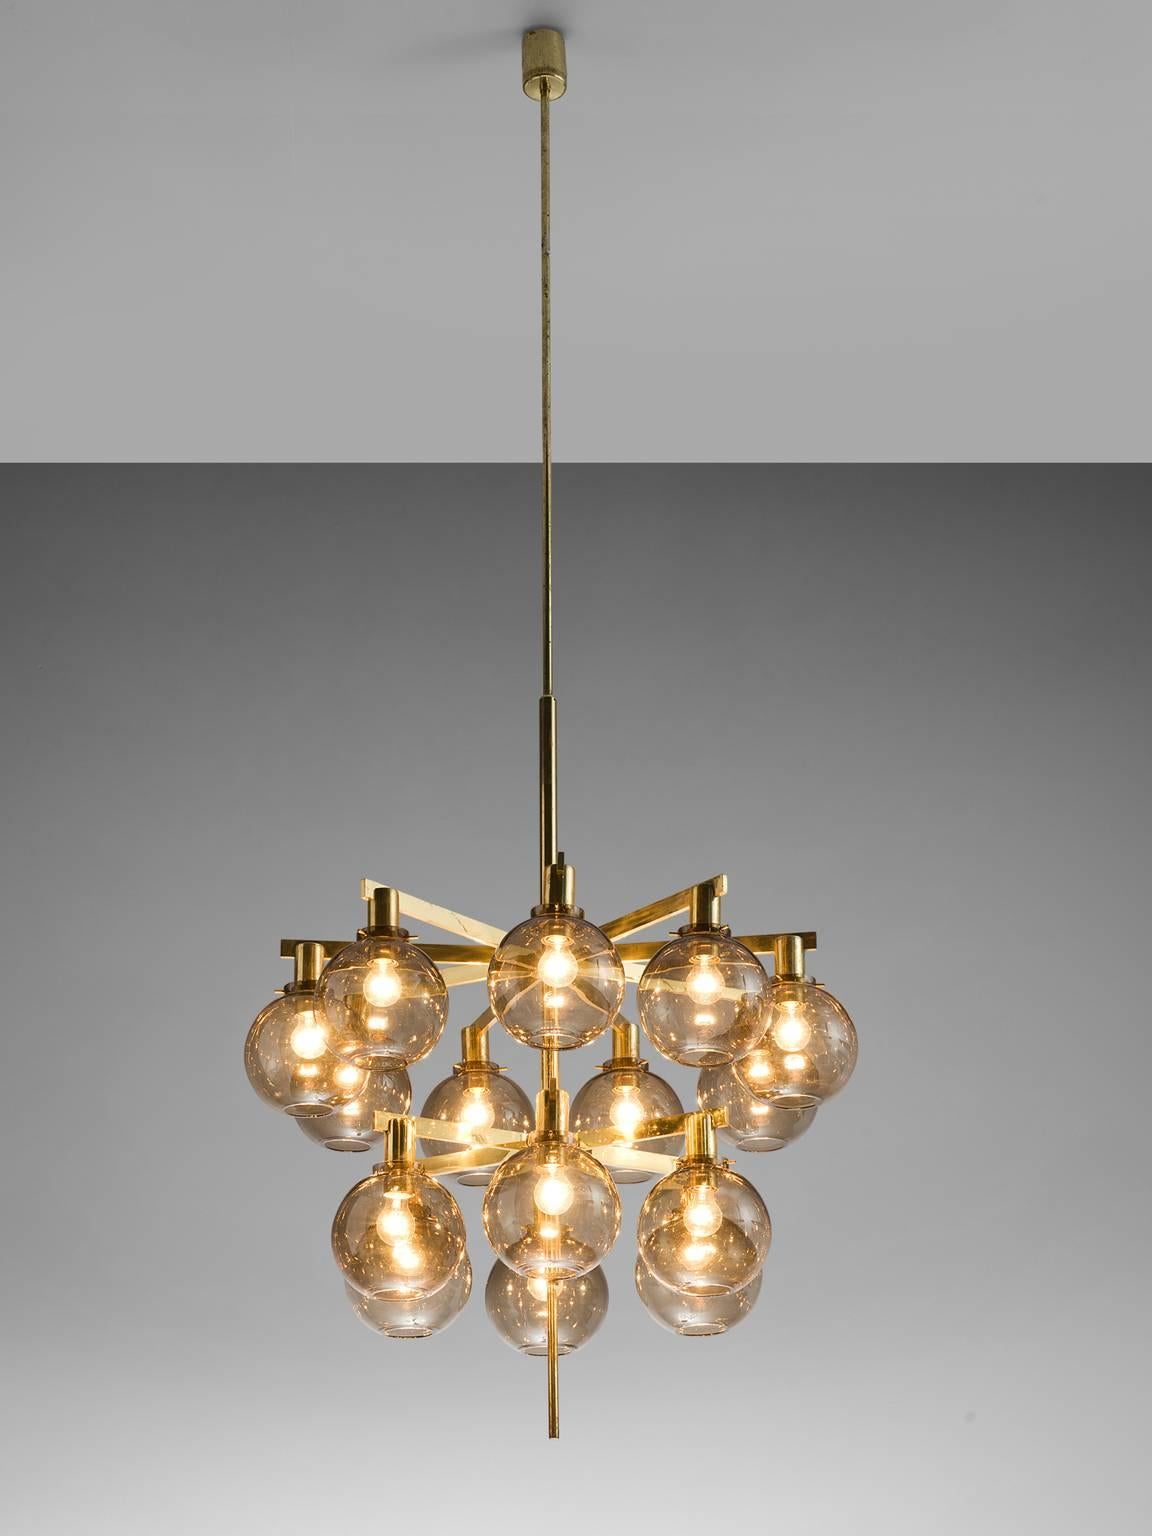 Hans-Agne Jakobsson, ceiling lamp model T-348/6 'Pastoral', brass and glass, Sweden. 

This ceiling lamp Model T348/15 'Pastoral' is designed by Hans-Agne Jakobsson. The chandelier is produced by Hans-Agne Jakobsson AB in Markaryd, Sweden. The